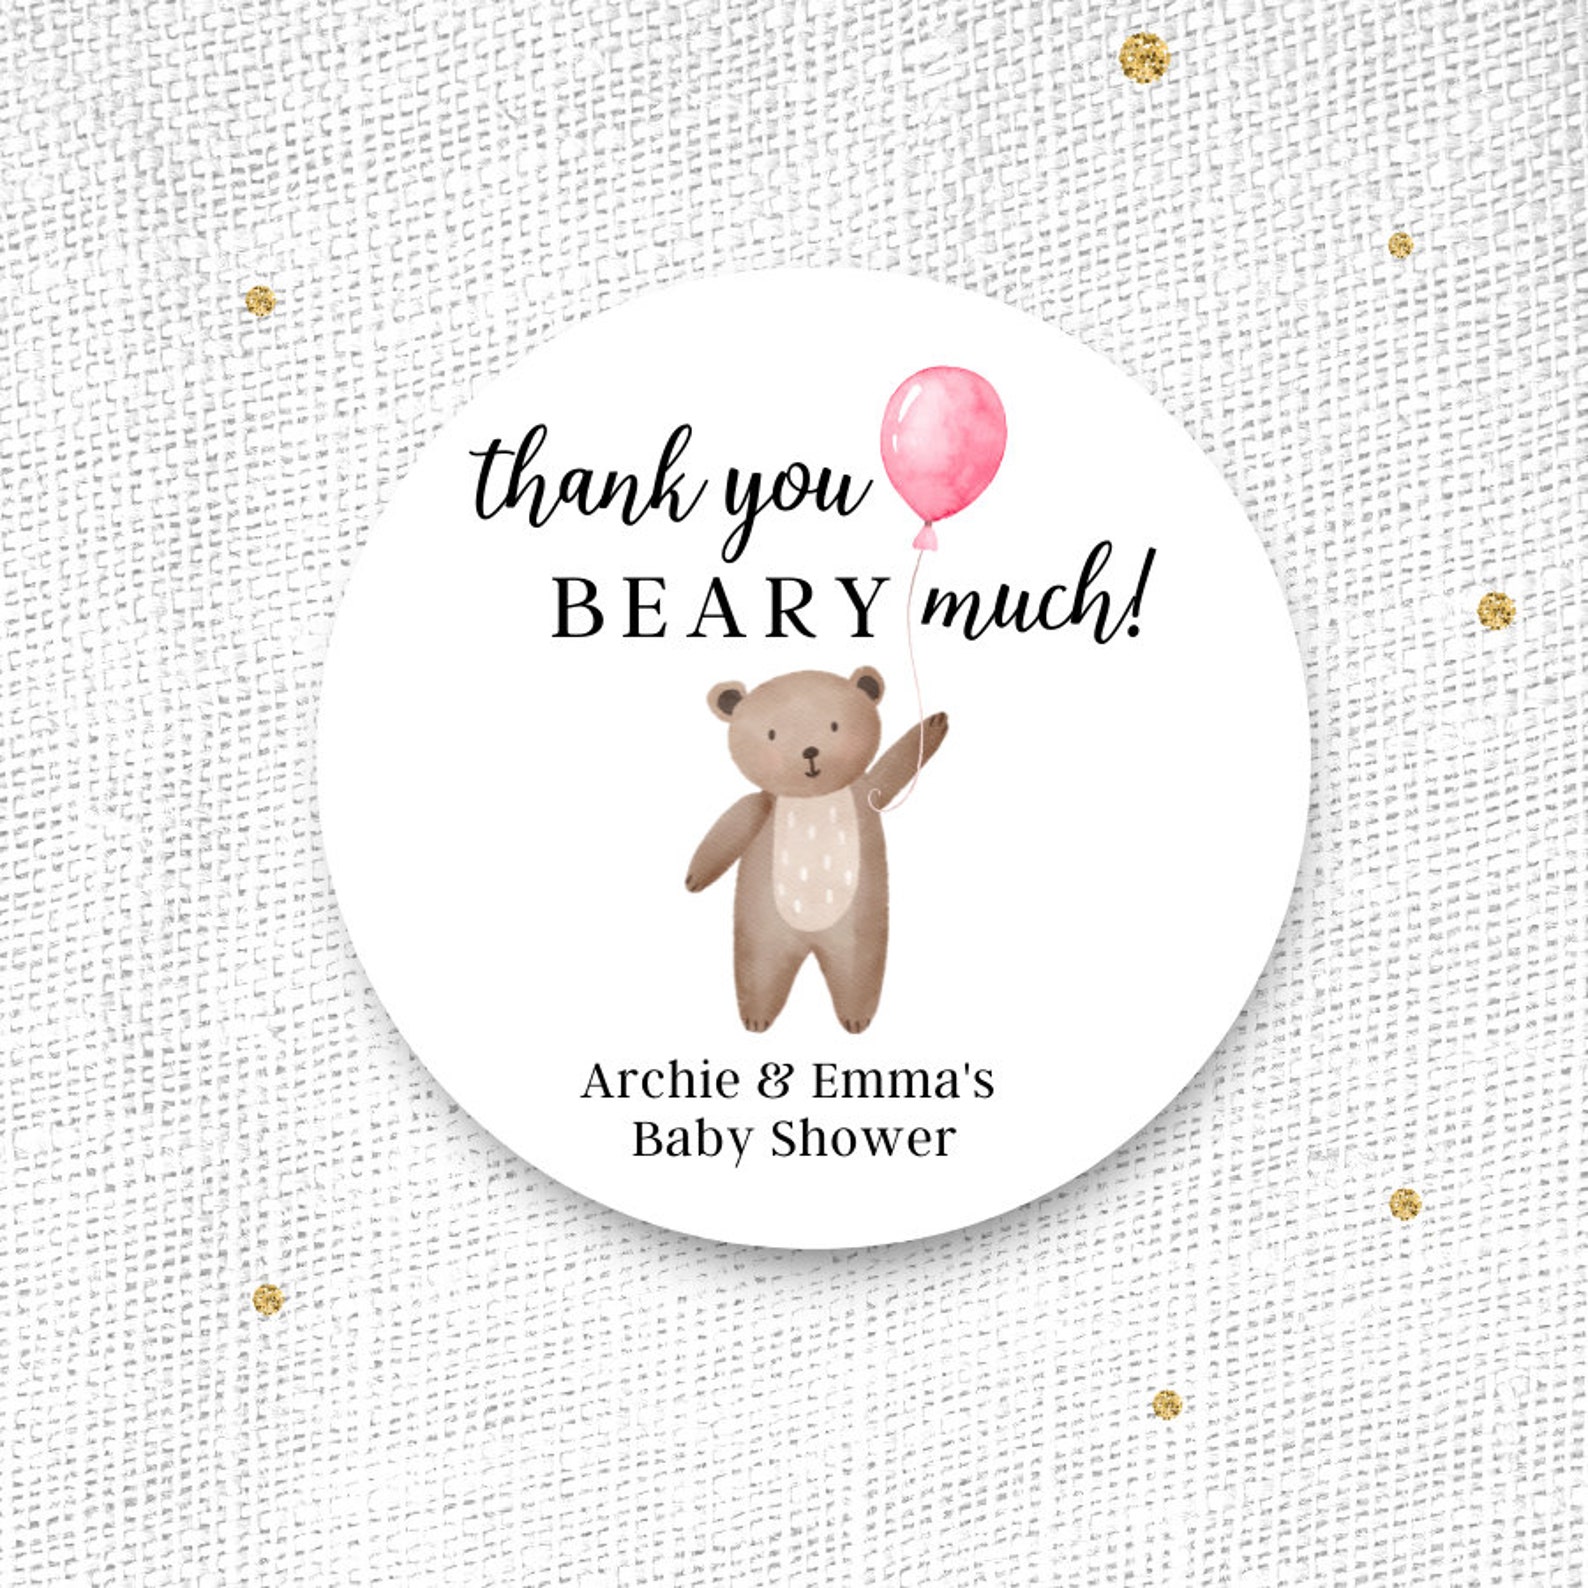 thank-you-beary-much-sticker-bear-baby-shower-baby-shower-etsy